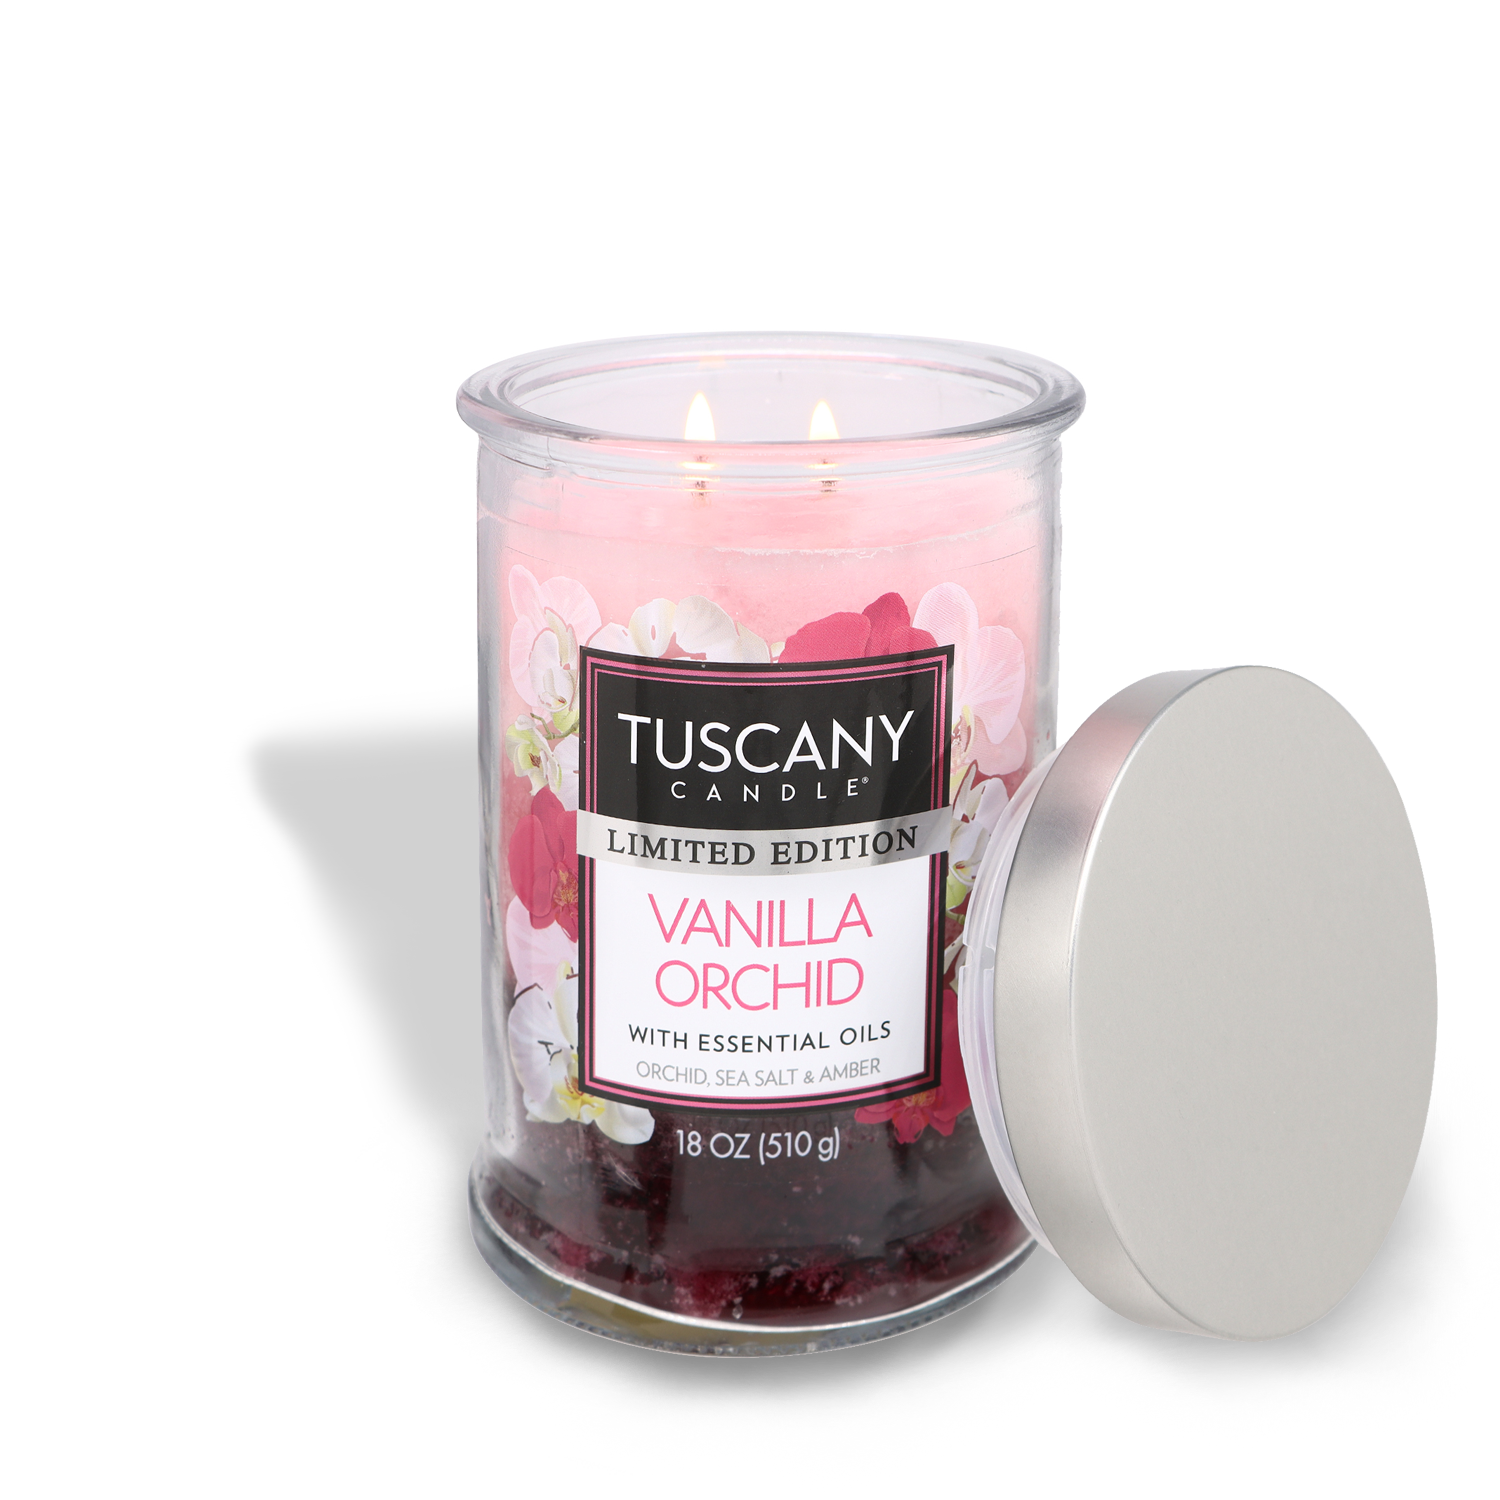 Vanilla Orchid Long-Lasting Scented Jar Candle (18 oz) from the Tuscany Candle® SEASONAL Collection.